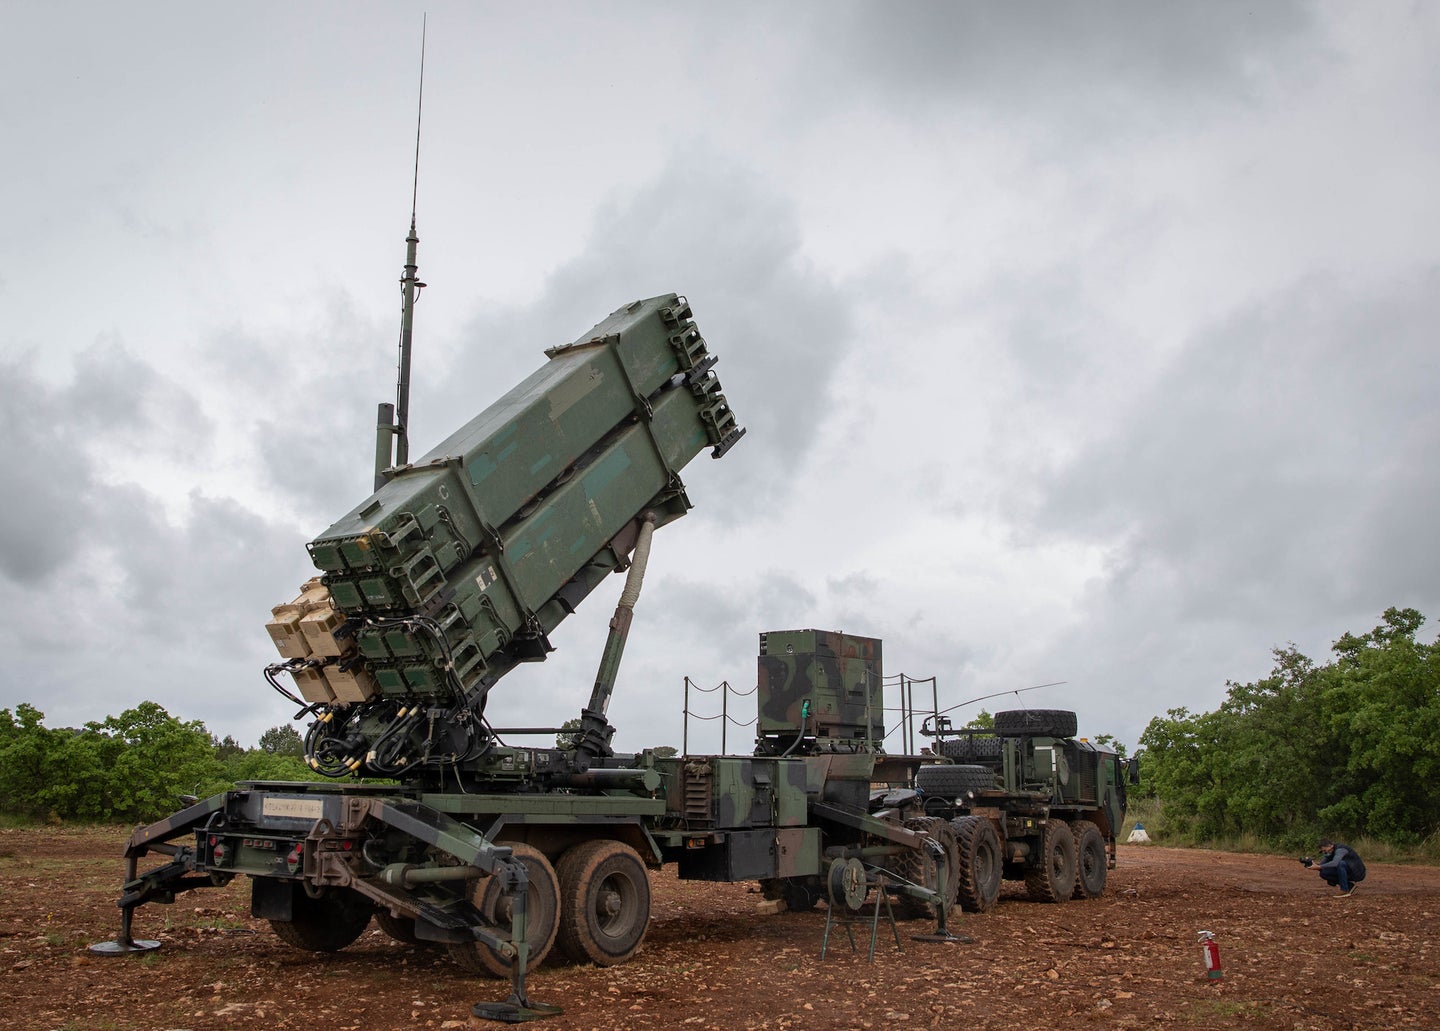 A Patriot missile system seen in Croatia in 2021 as part of an exercise. 